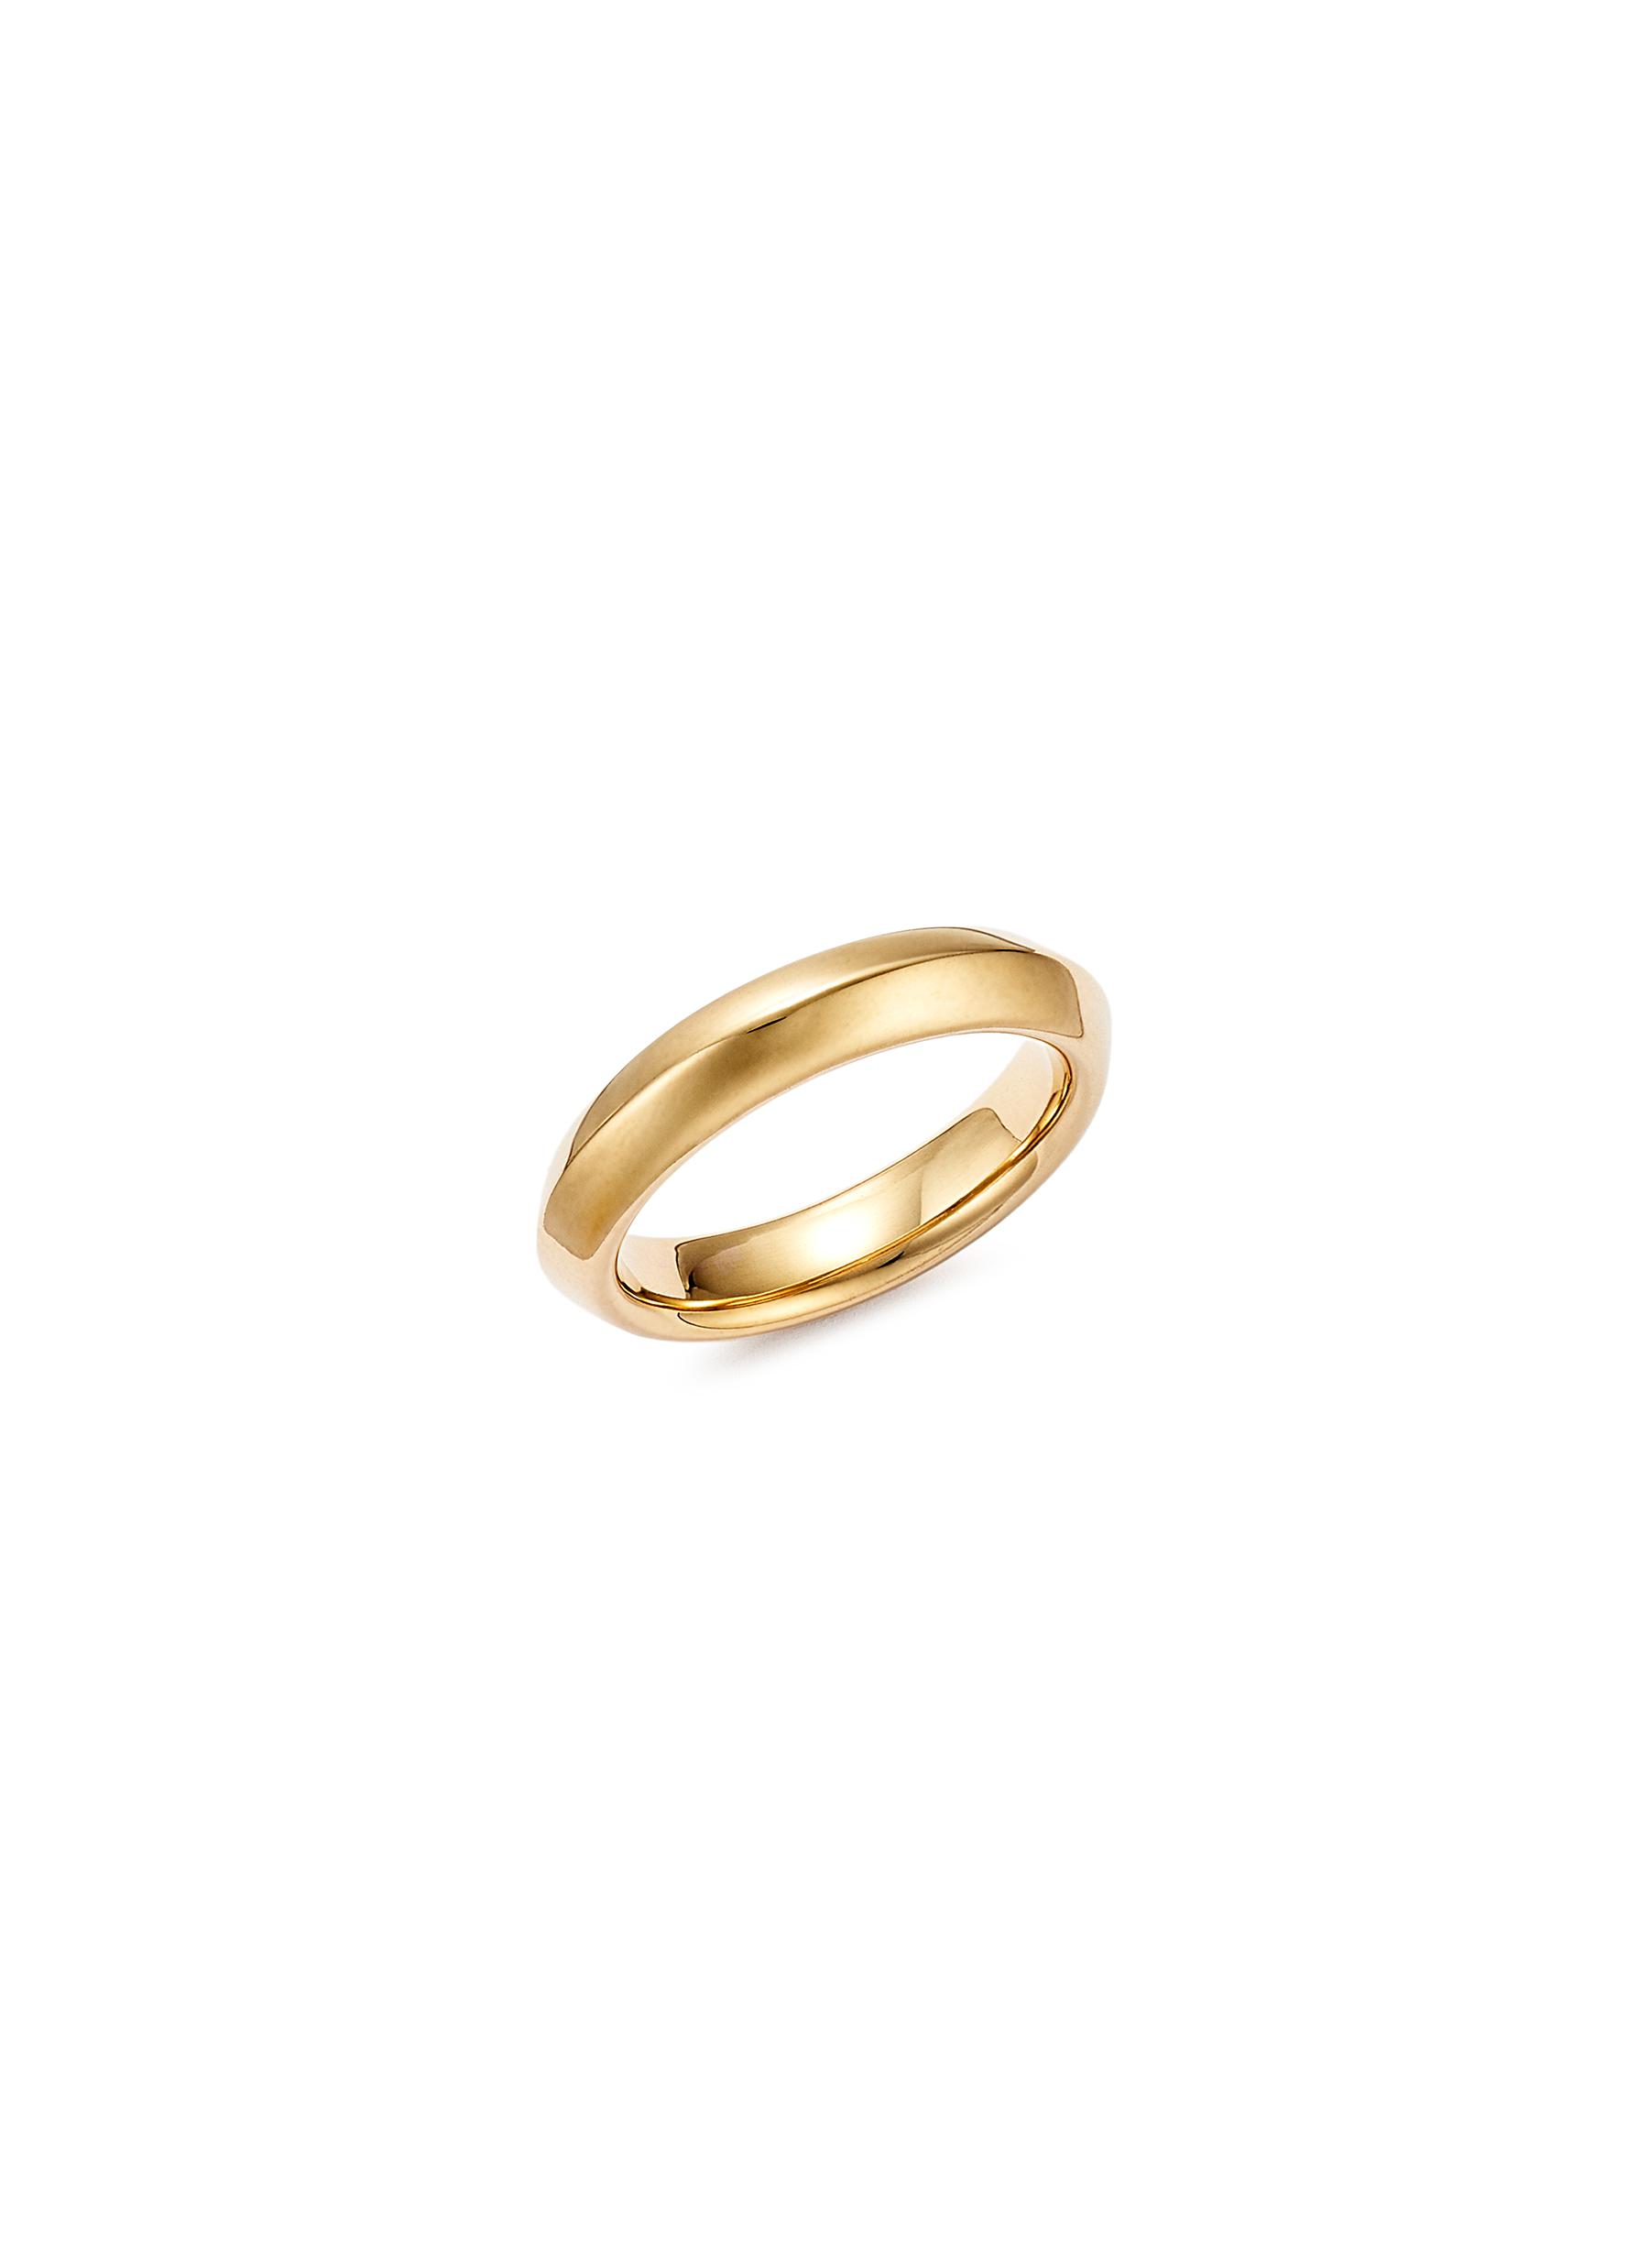 FUTURA ‘AMORE' 18K FAIRMINED ECOLOGICAL GOLD RING